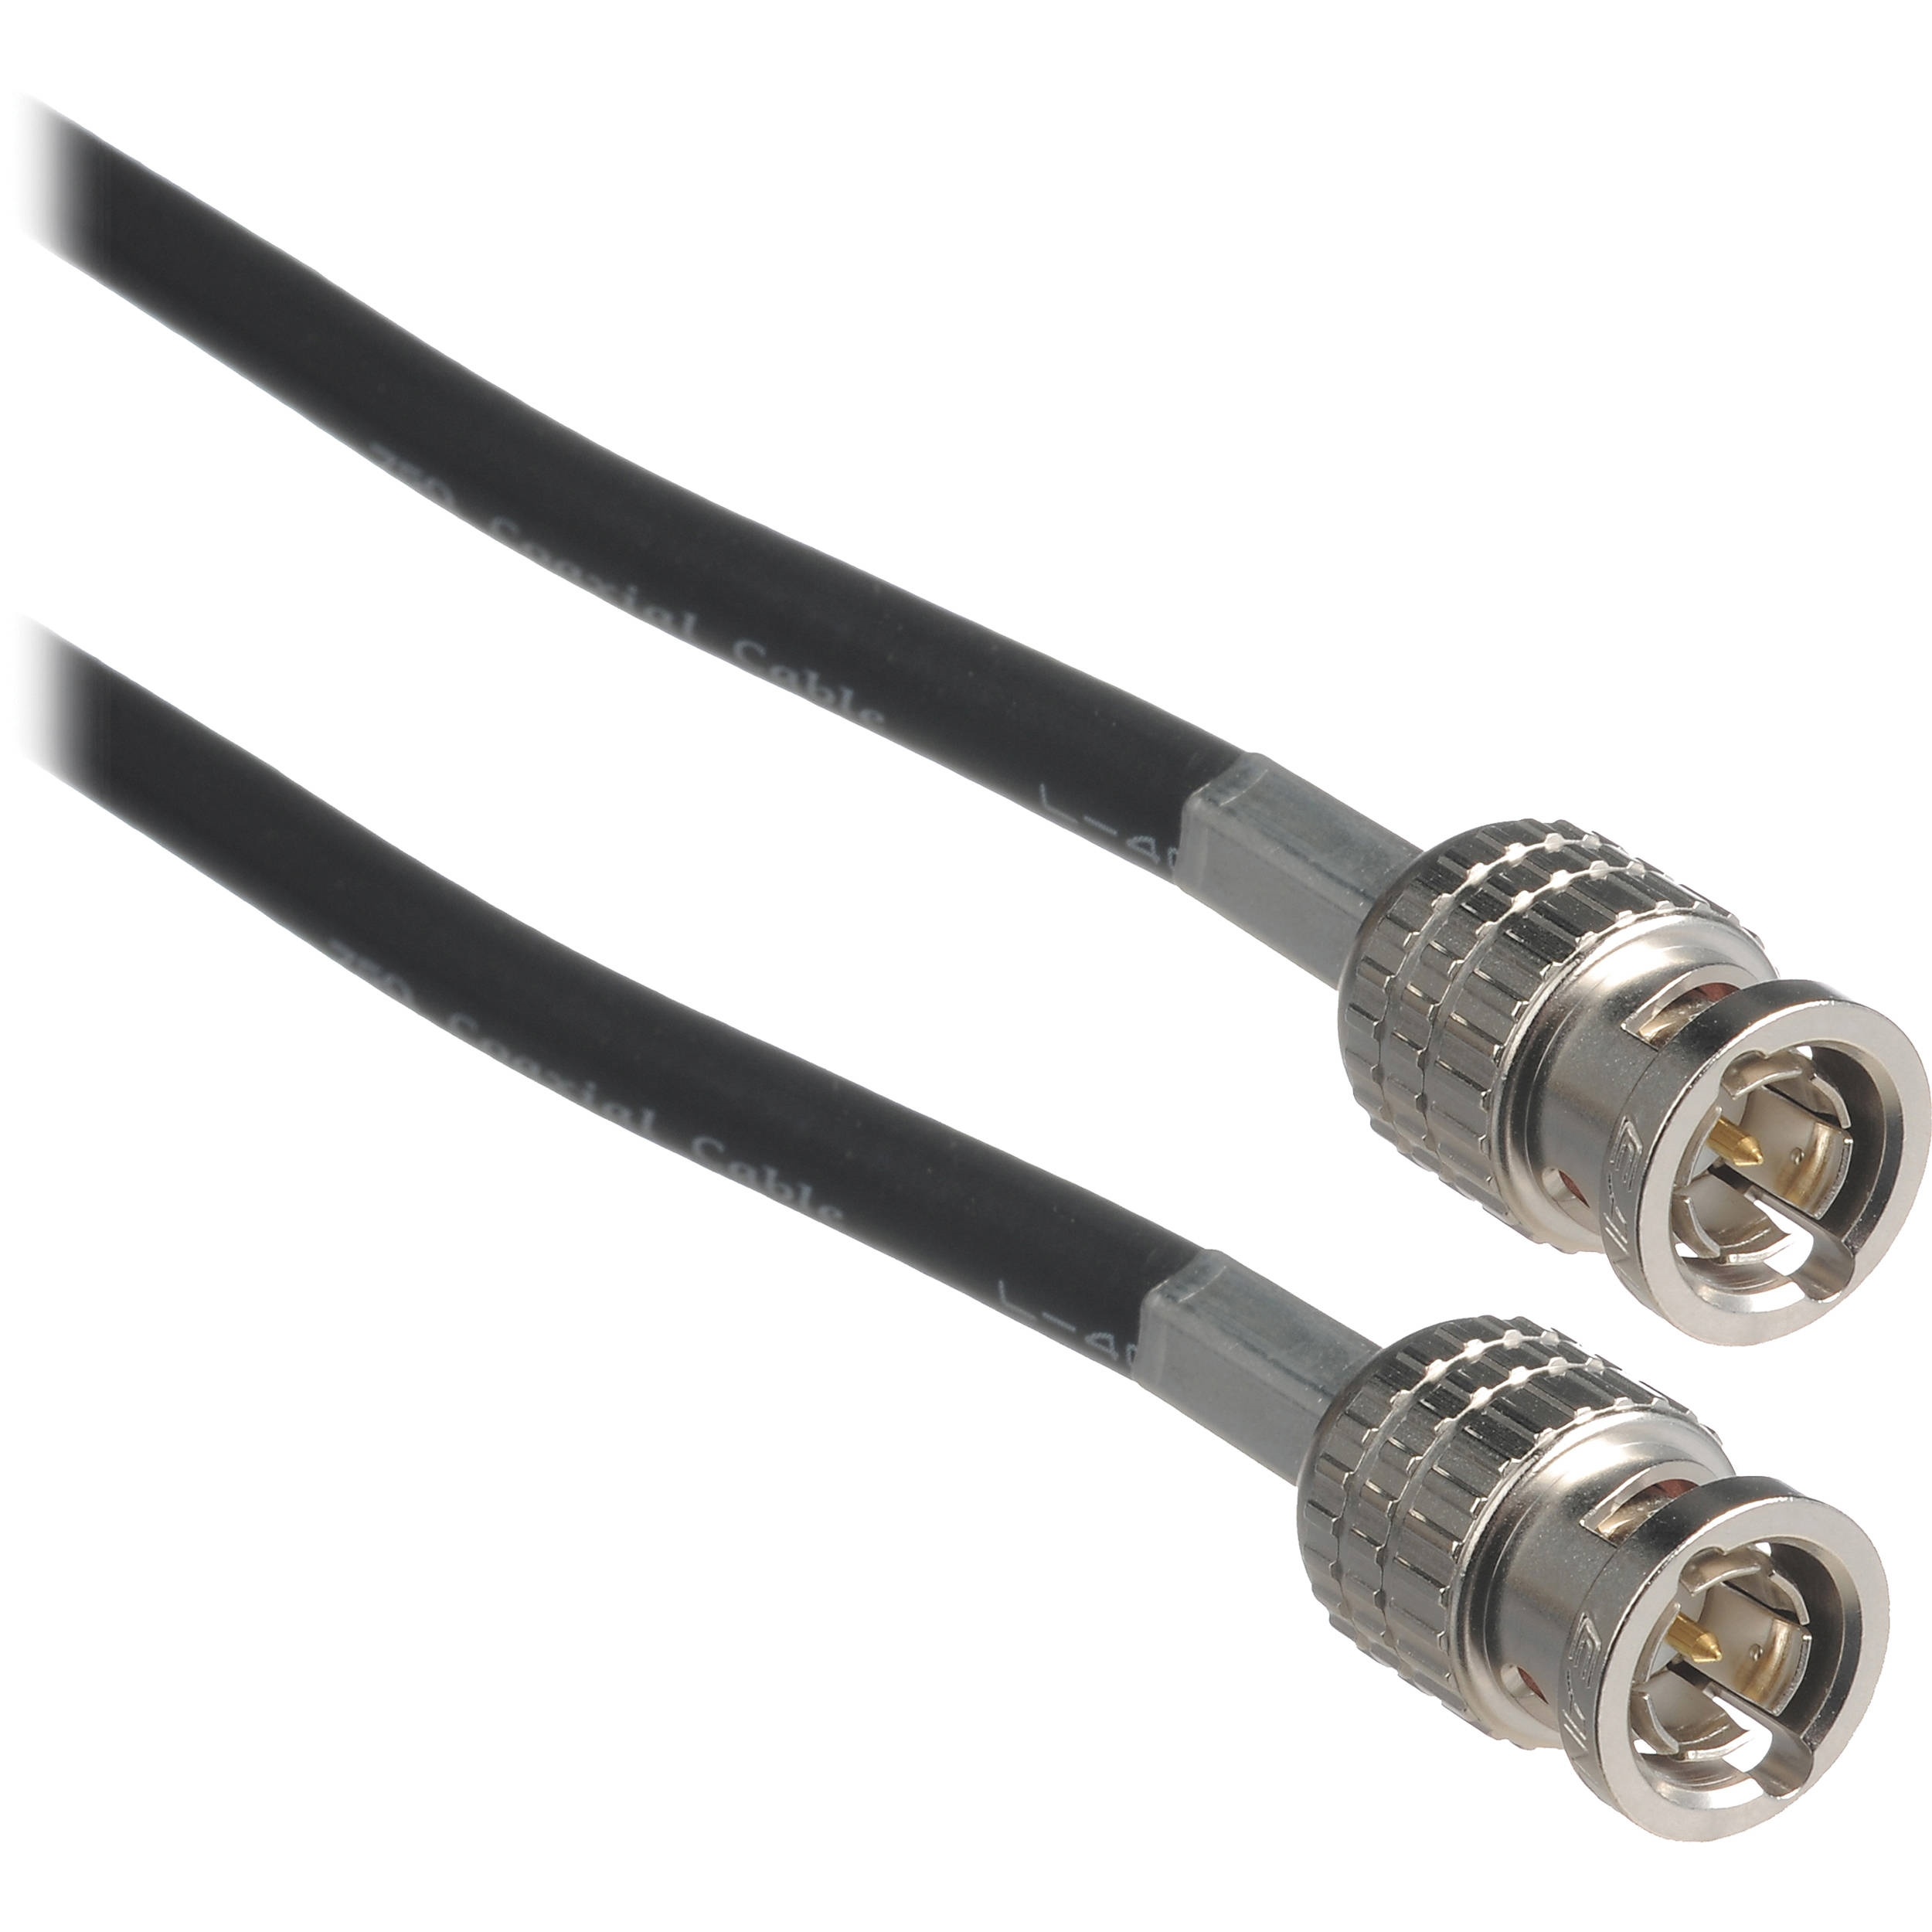 Shure BNC Antenna Cable (100-foot)